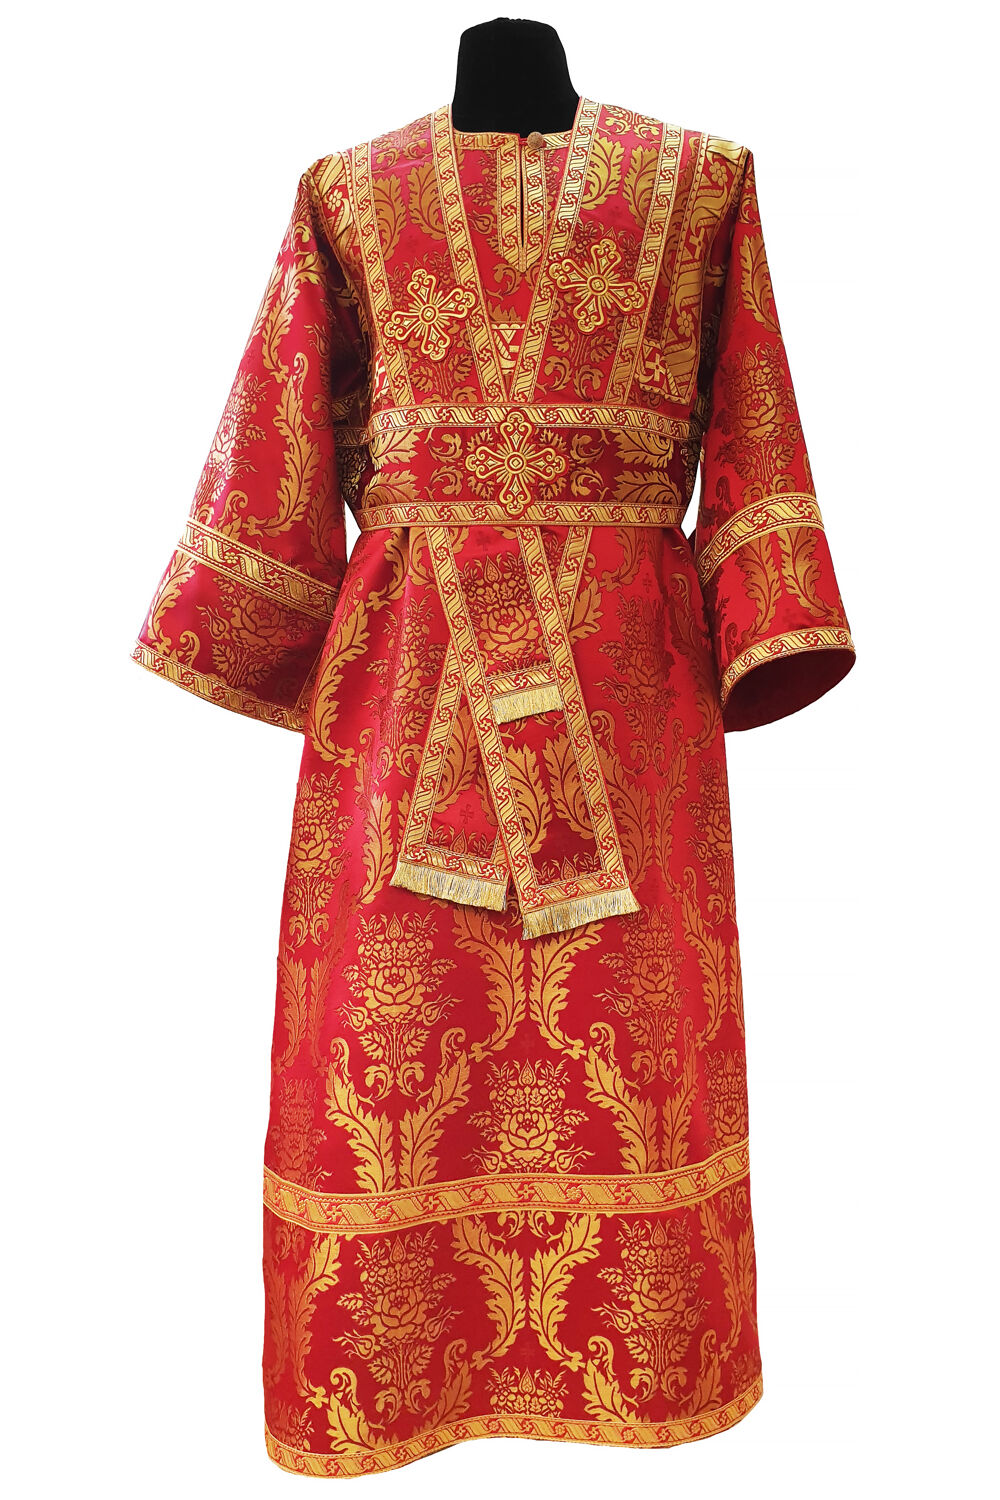 Vestment of Subdeacon red